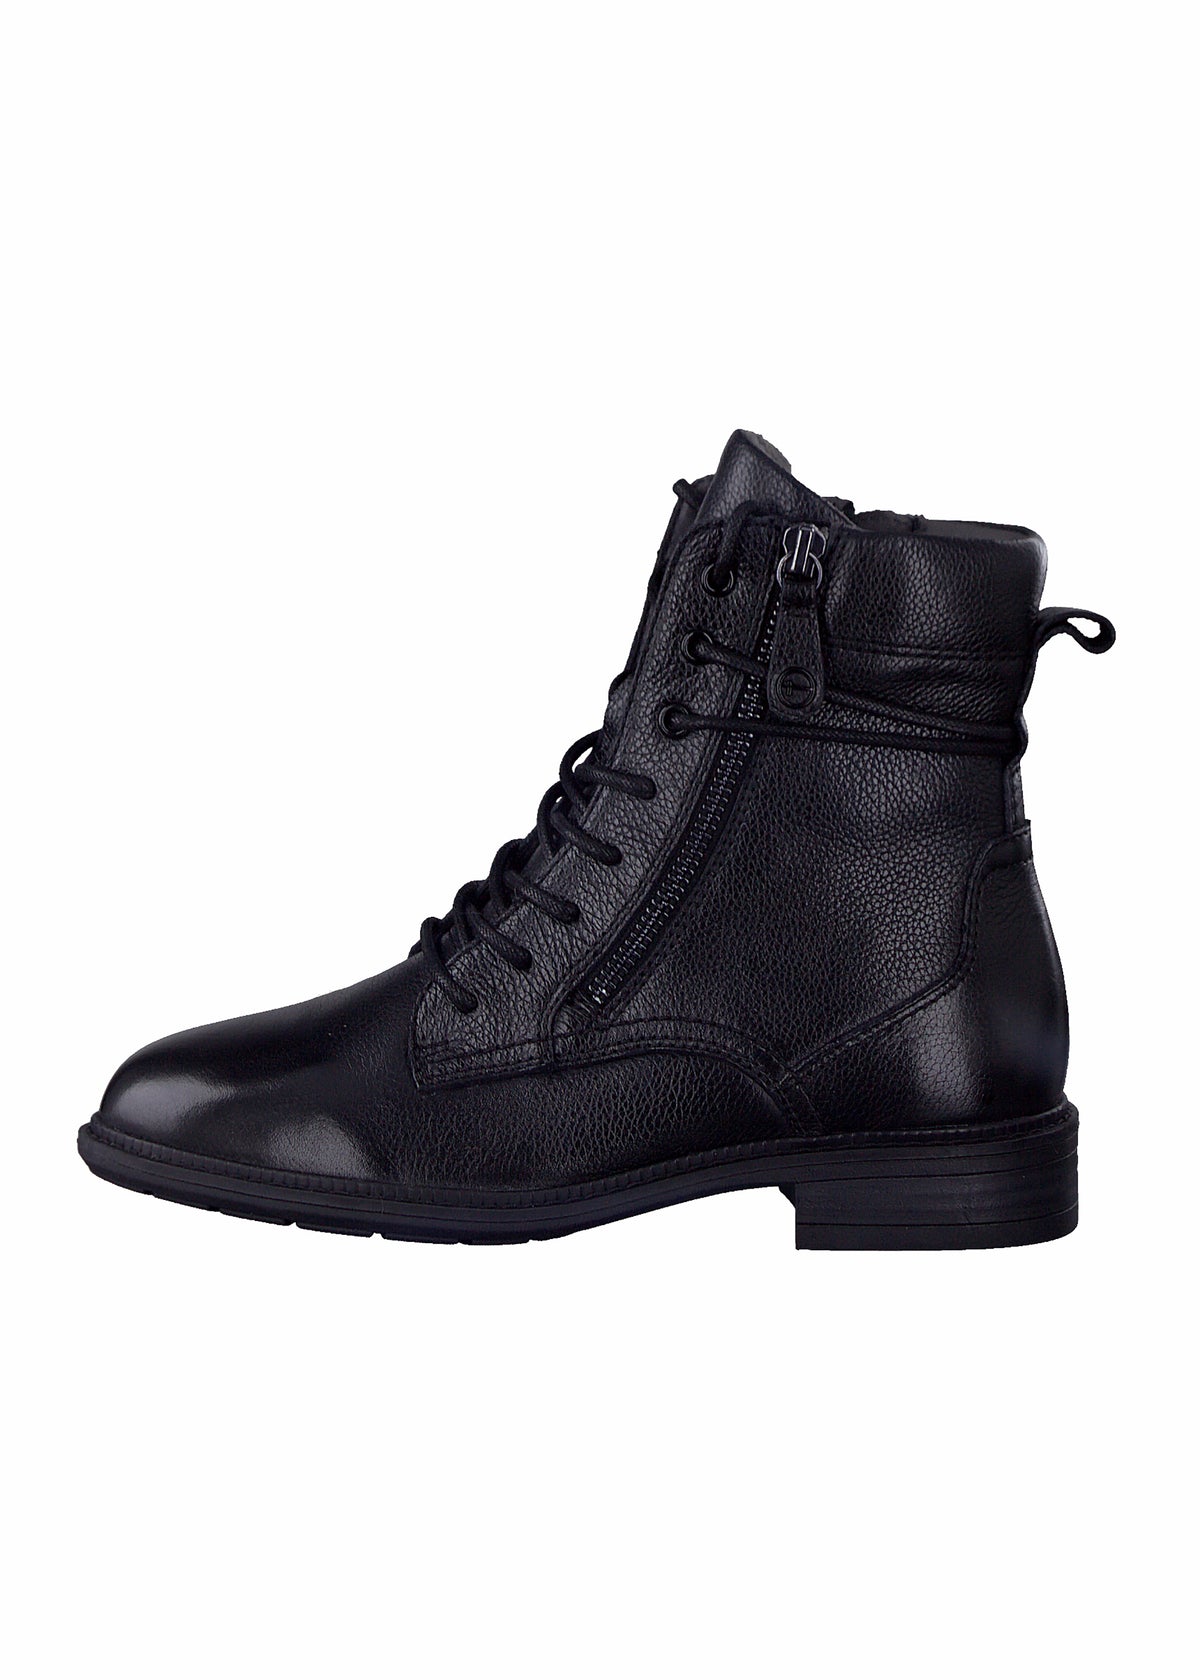 Ankle boots with a low heel - black